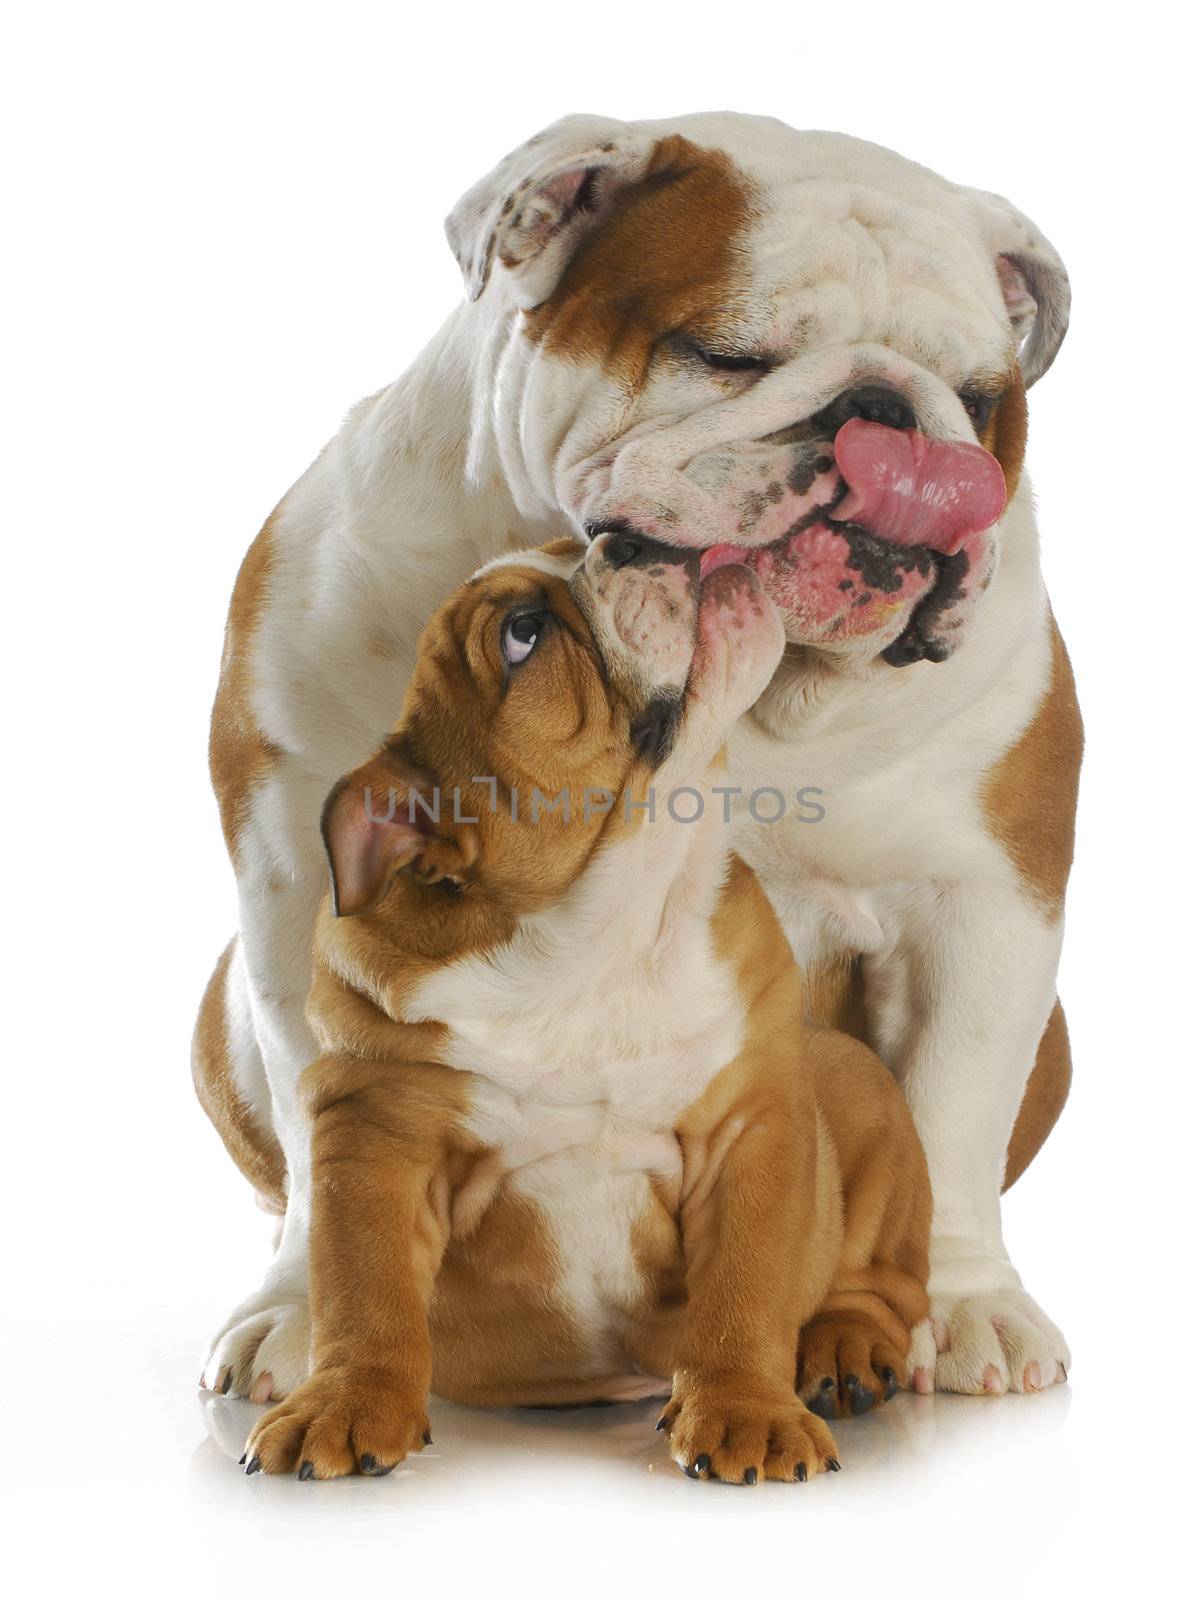 bulldog father and son kissing each other